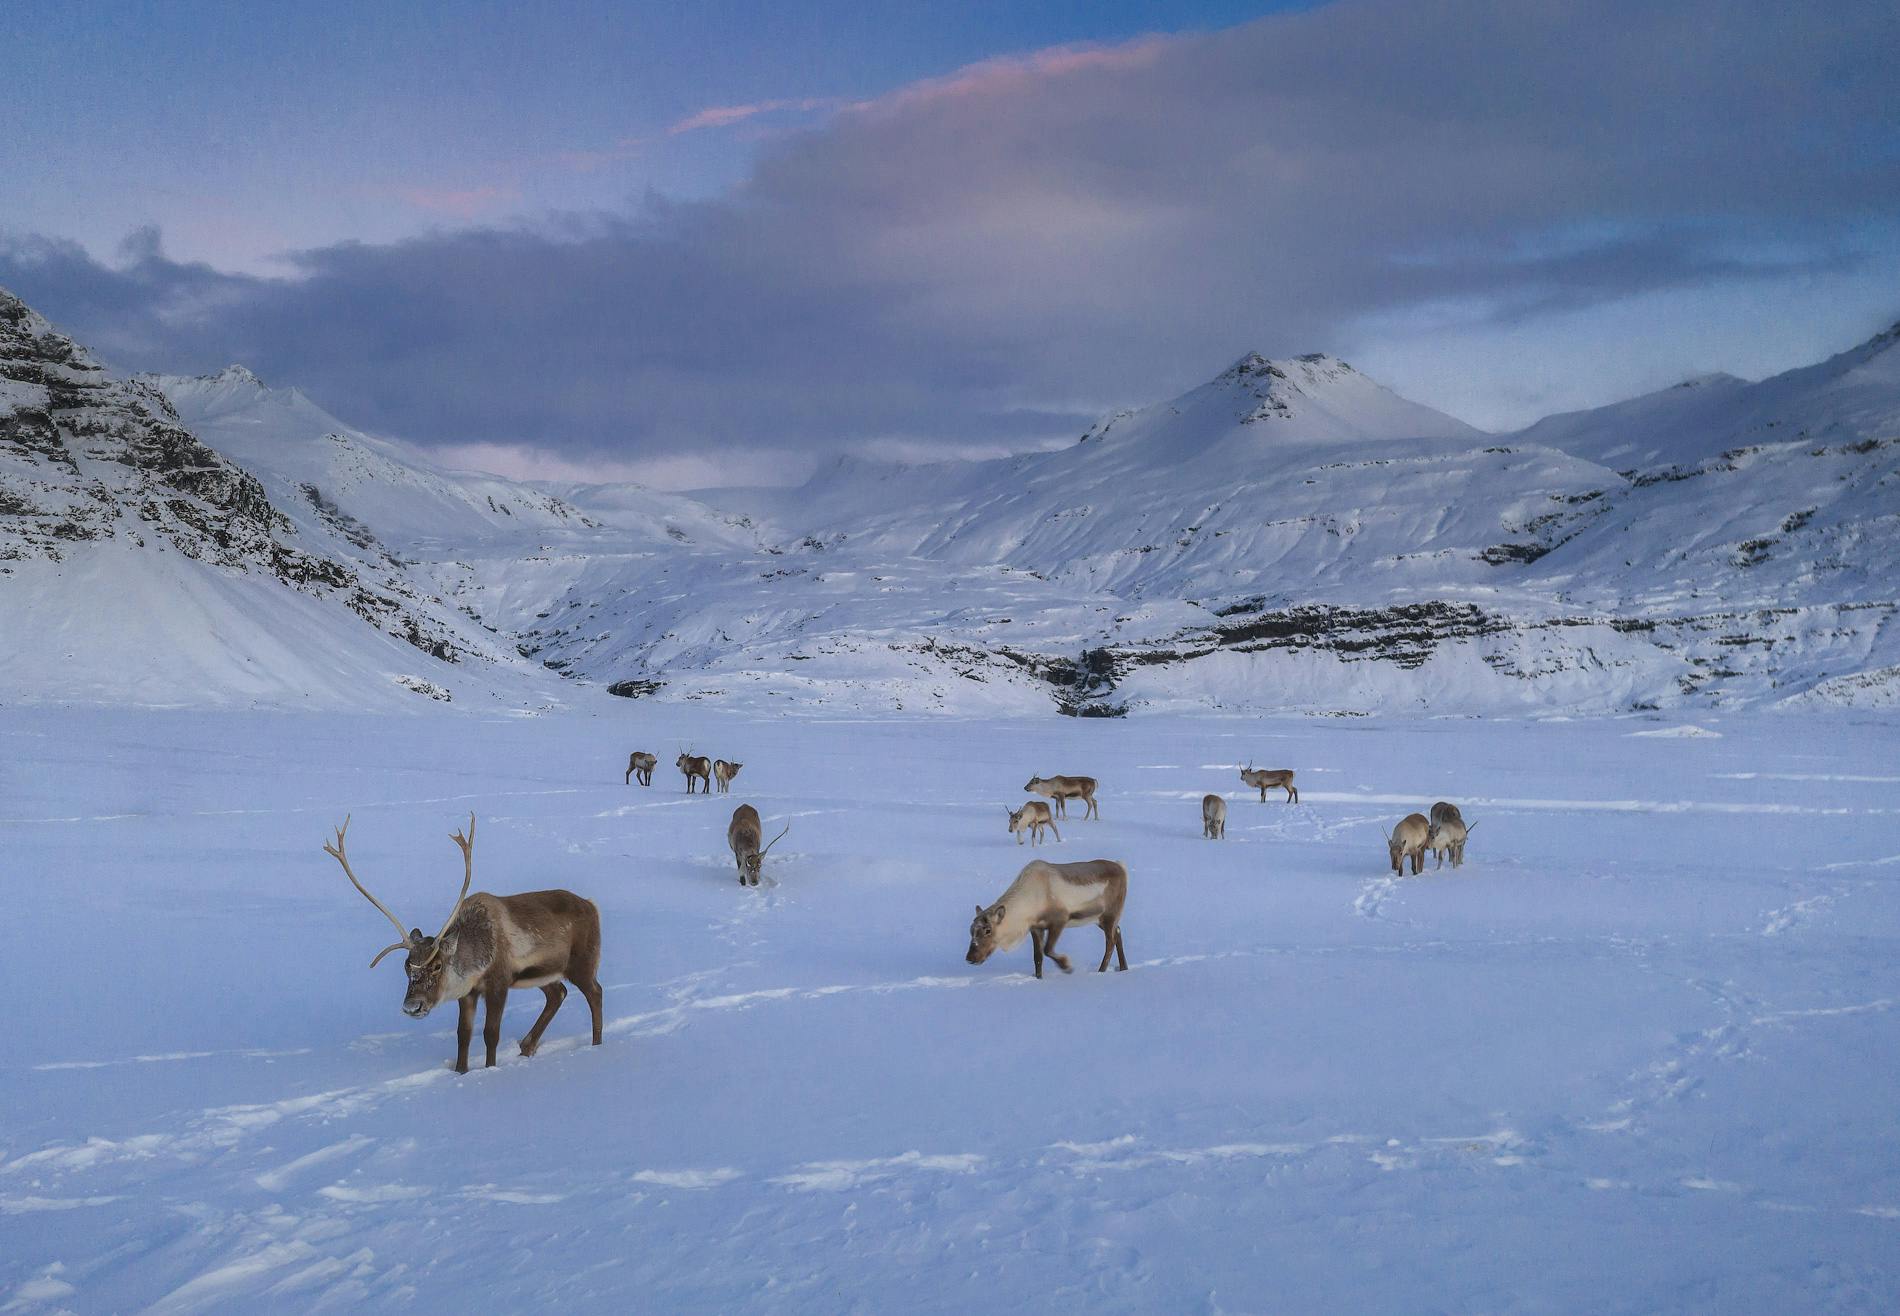 If you're lucky, you might spot some wild reindeer during your time in the Eastfjords.